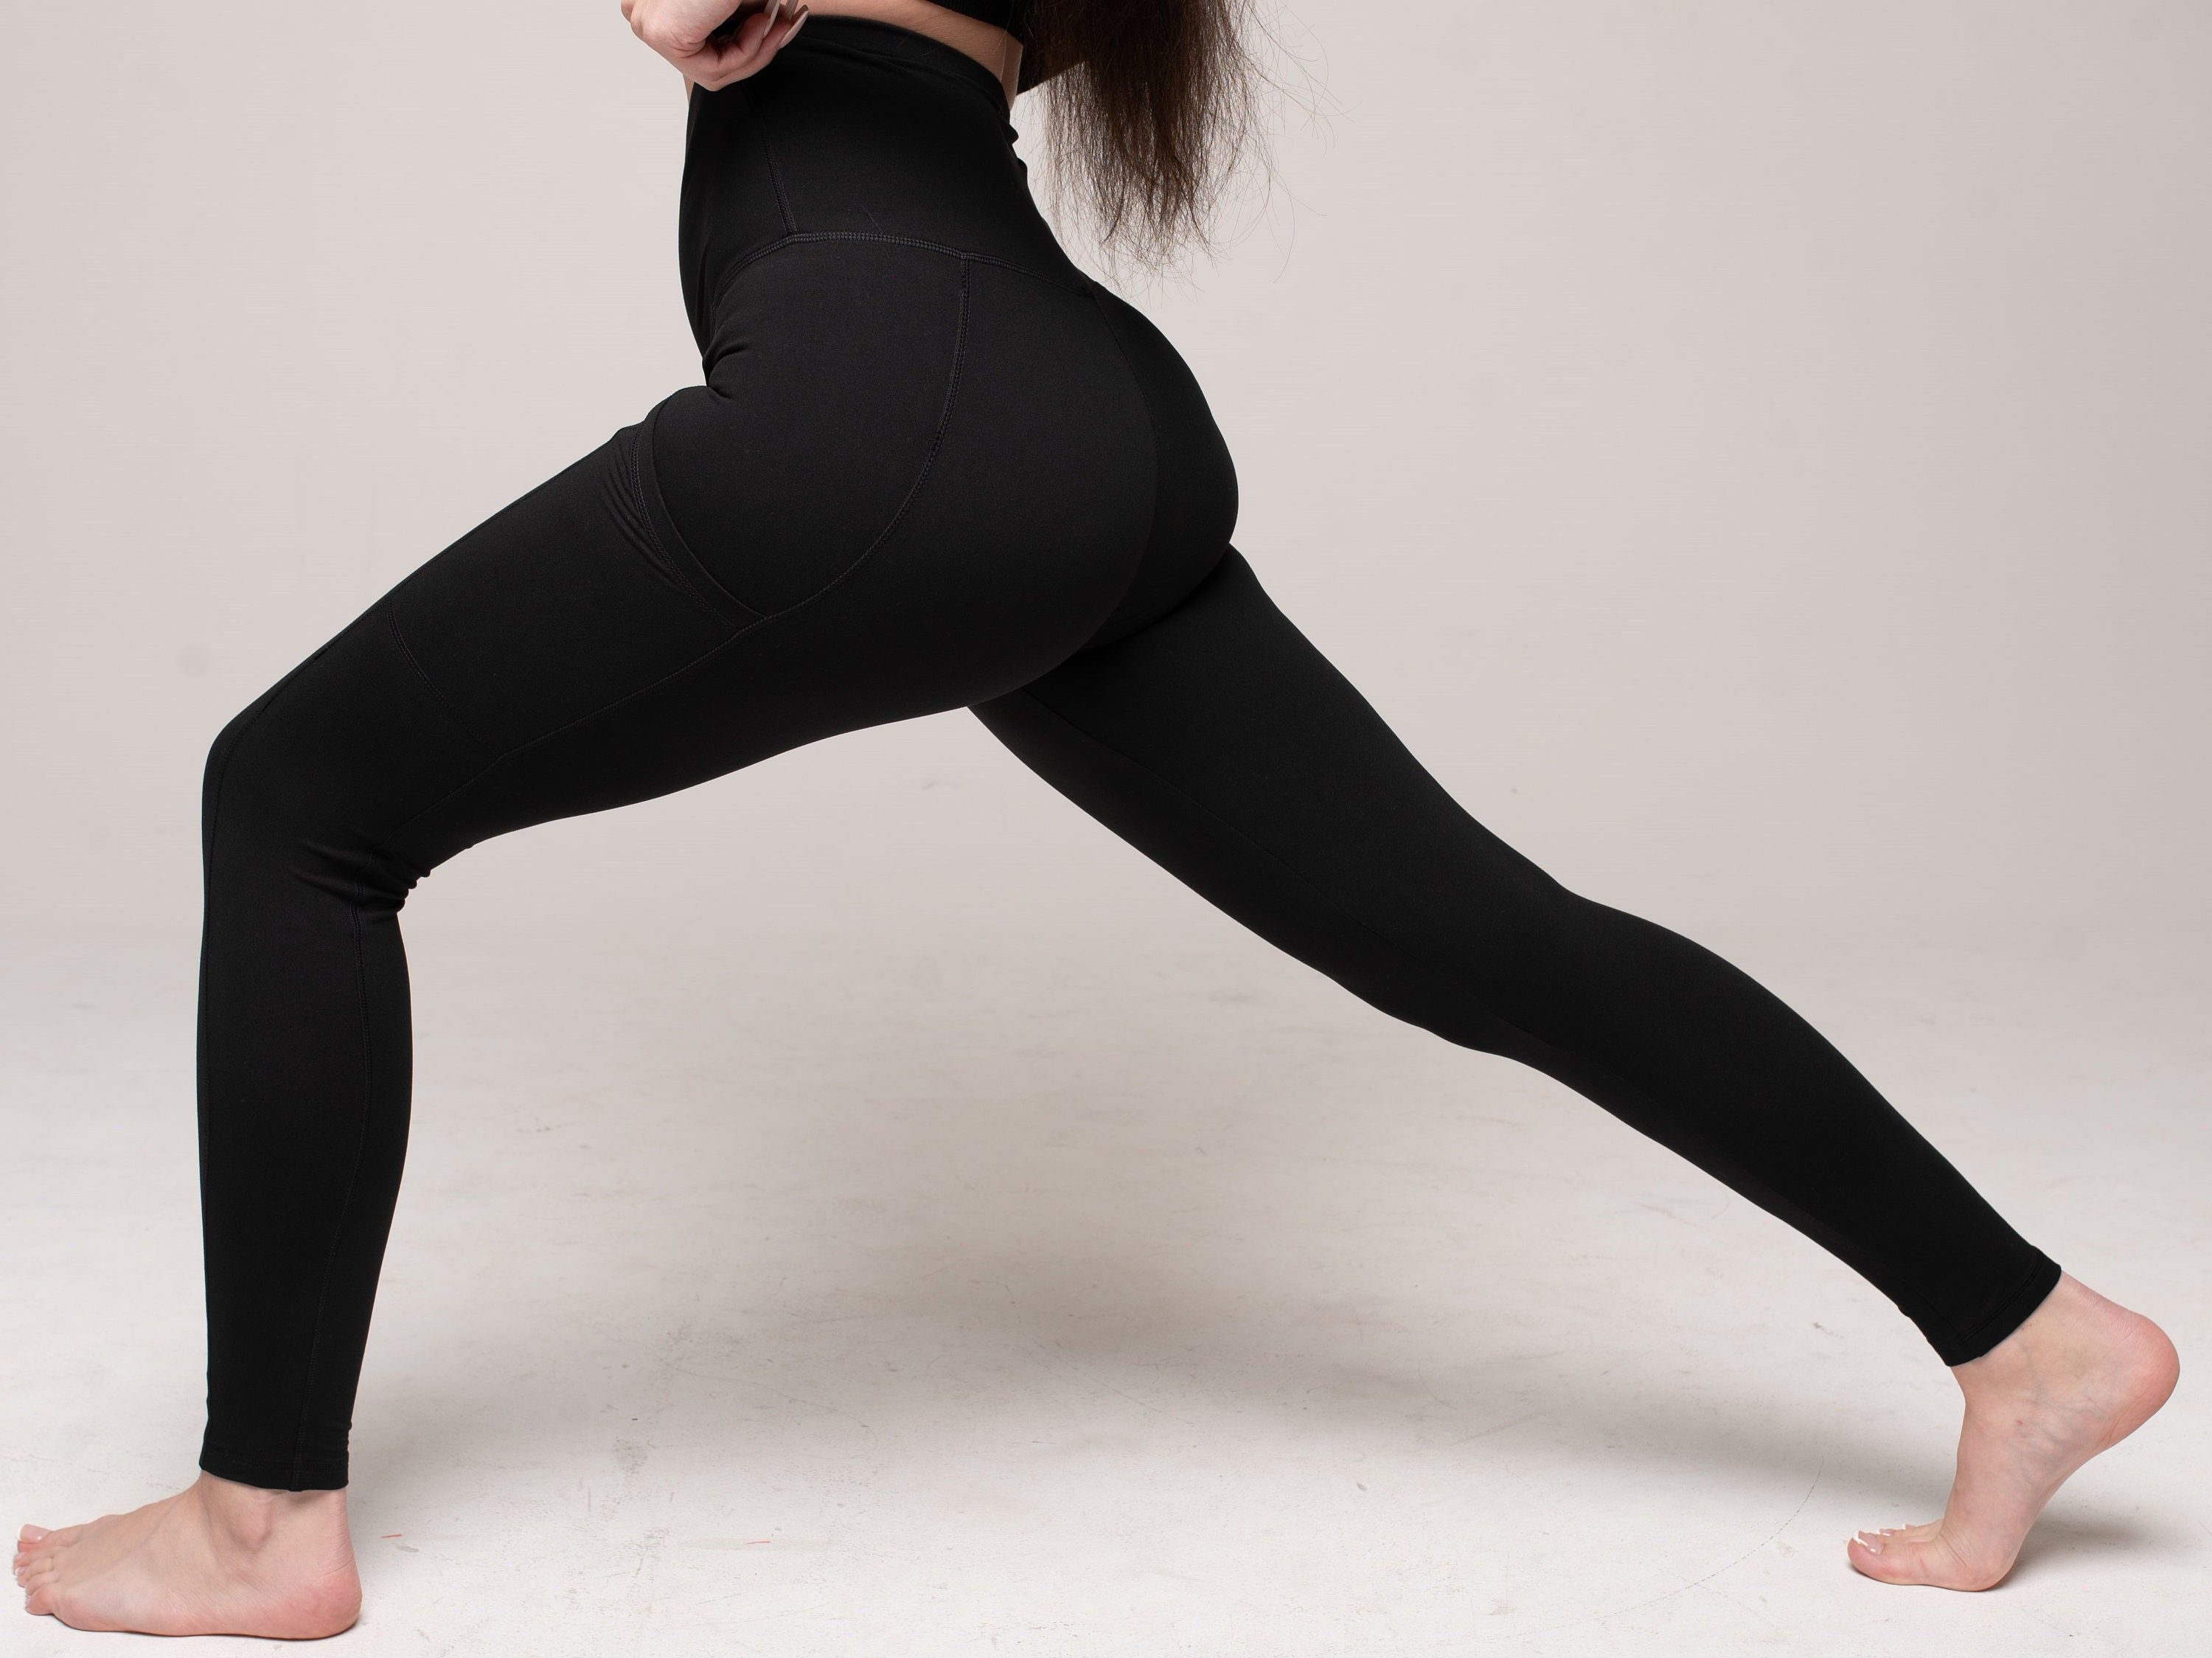 Buy Black Leggings With Pockets for Women, Yoga Pants, 5 High Waist Leggings,  Buttery Soft, One Size, Plus Size, 2XL Leggings, Workout Leggings Online in  India 